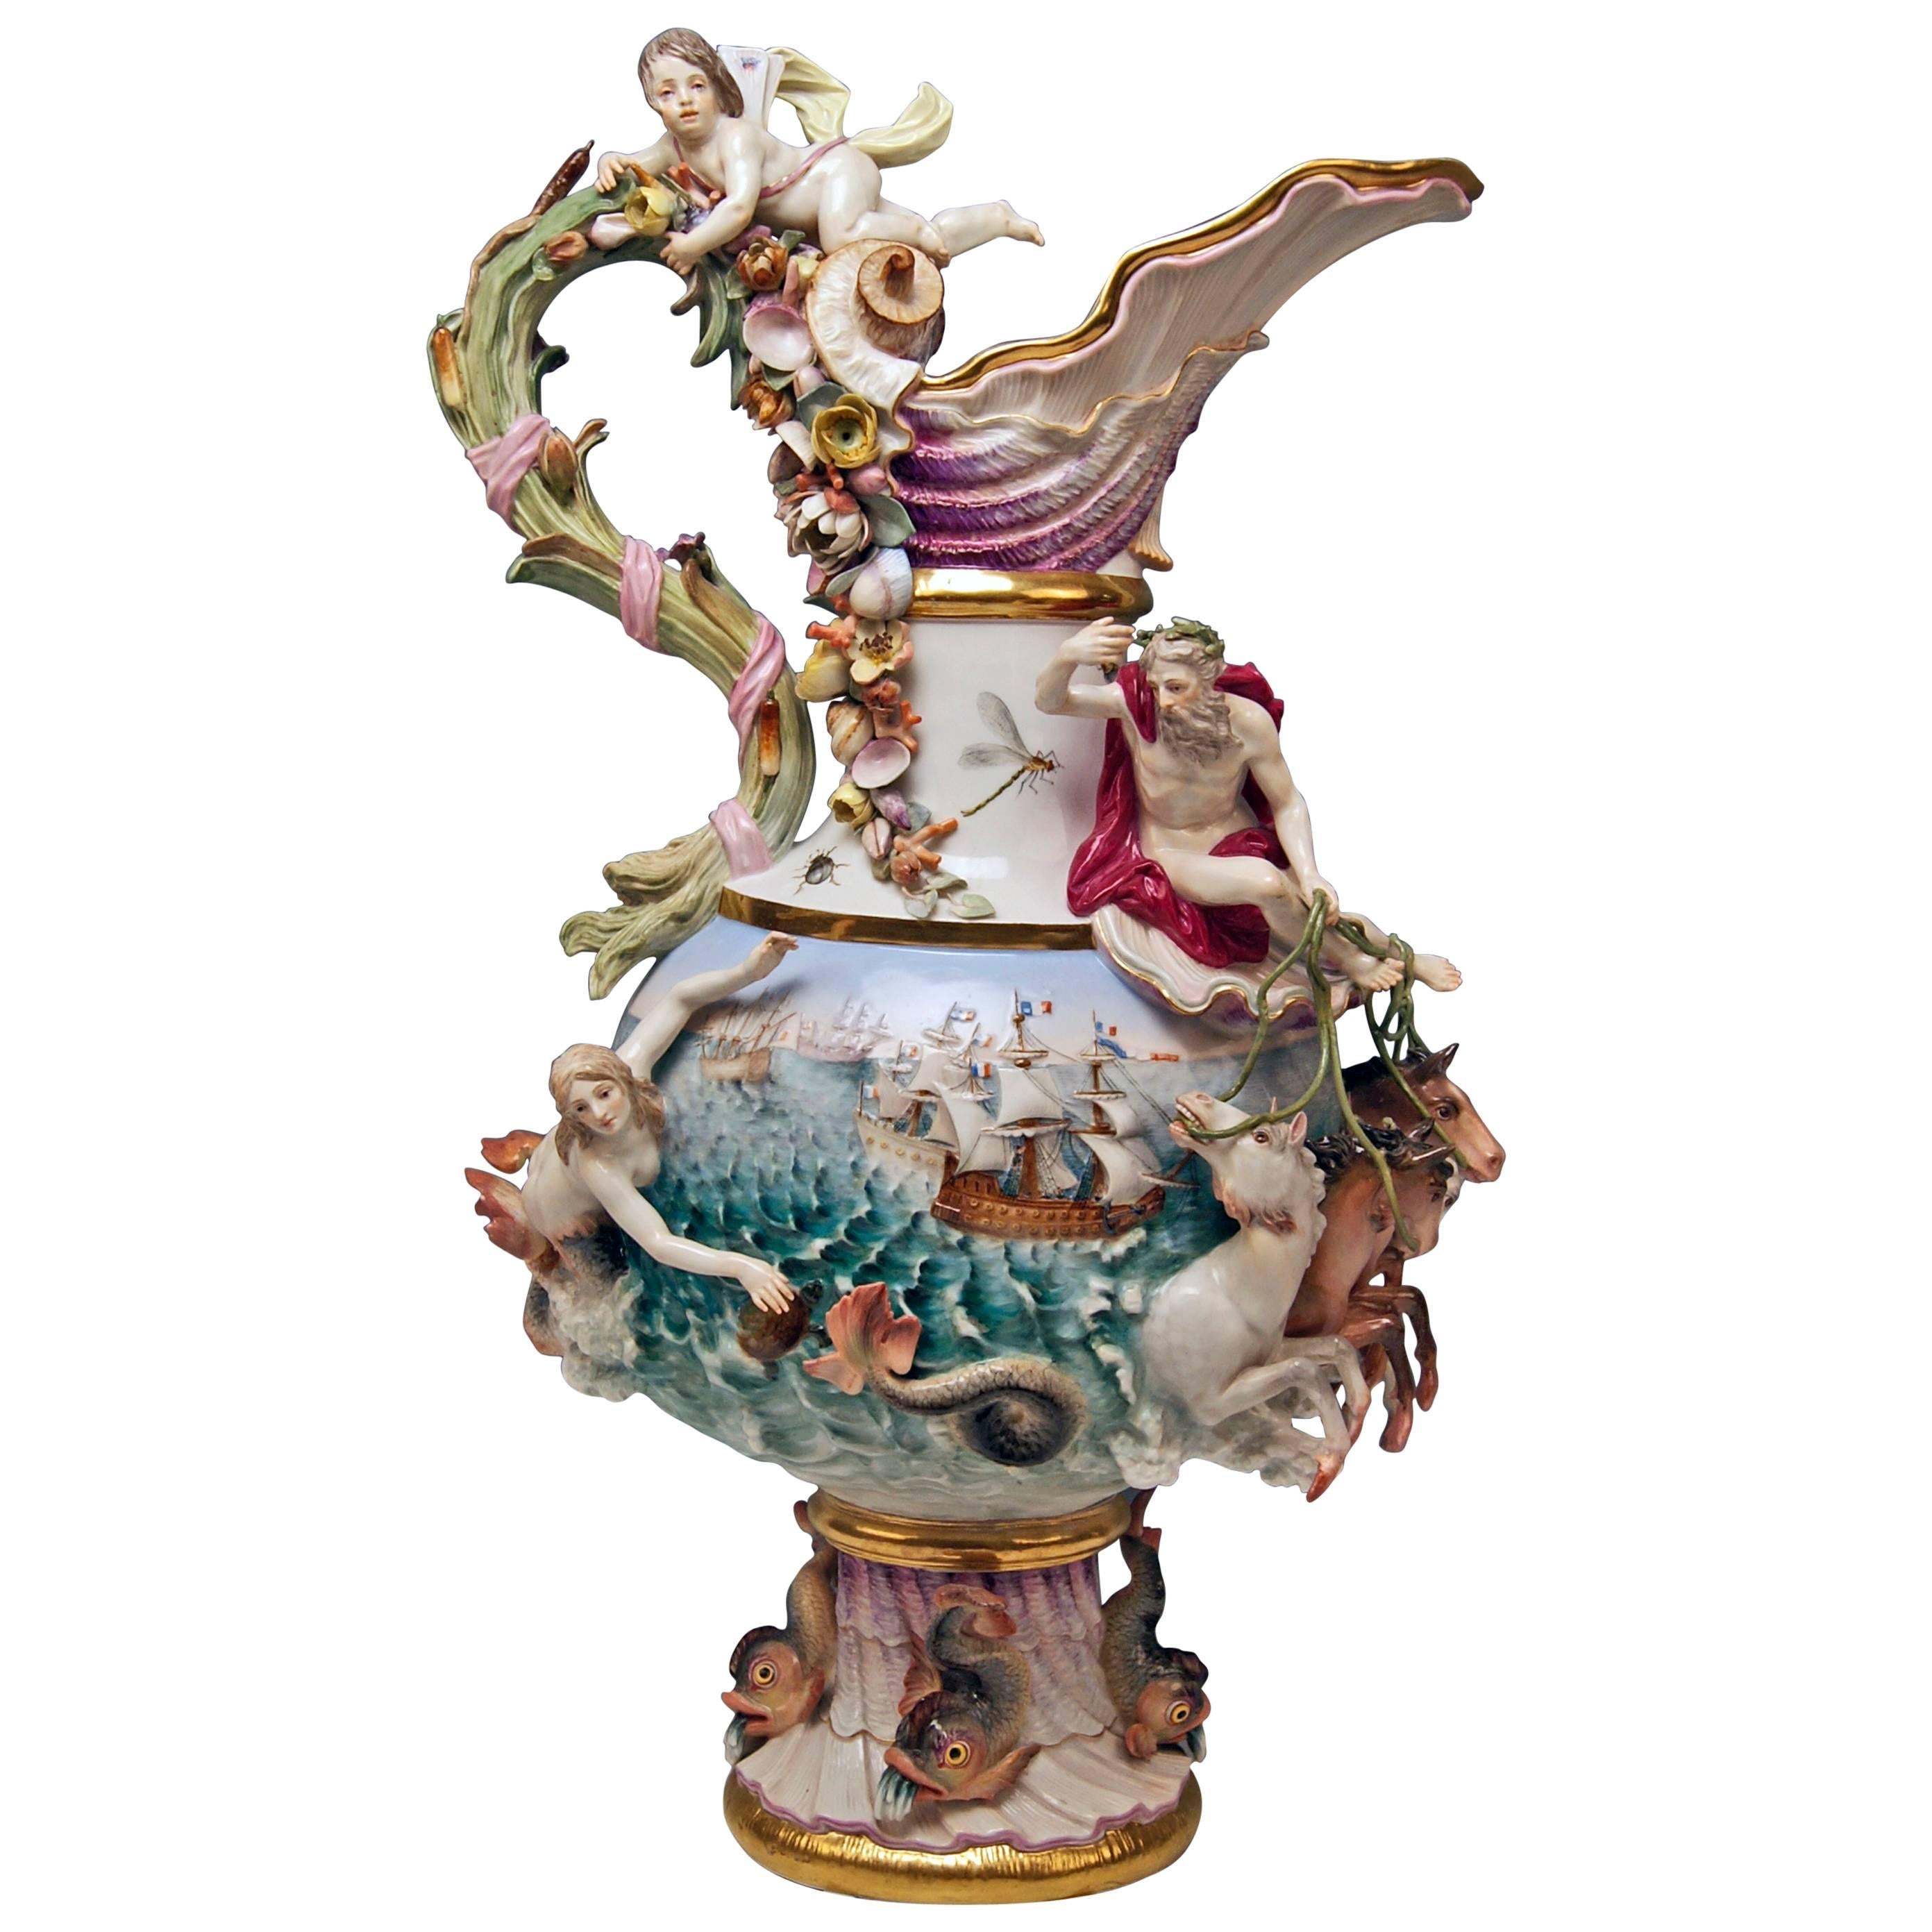 MEISSEN HUGE EWER THE WATER FOUR ELEMENTS BY KAENDLER height 25.78 inches c.1860